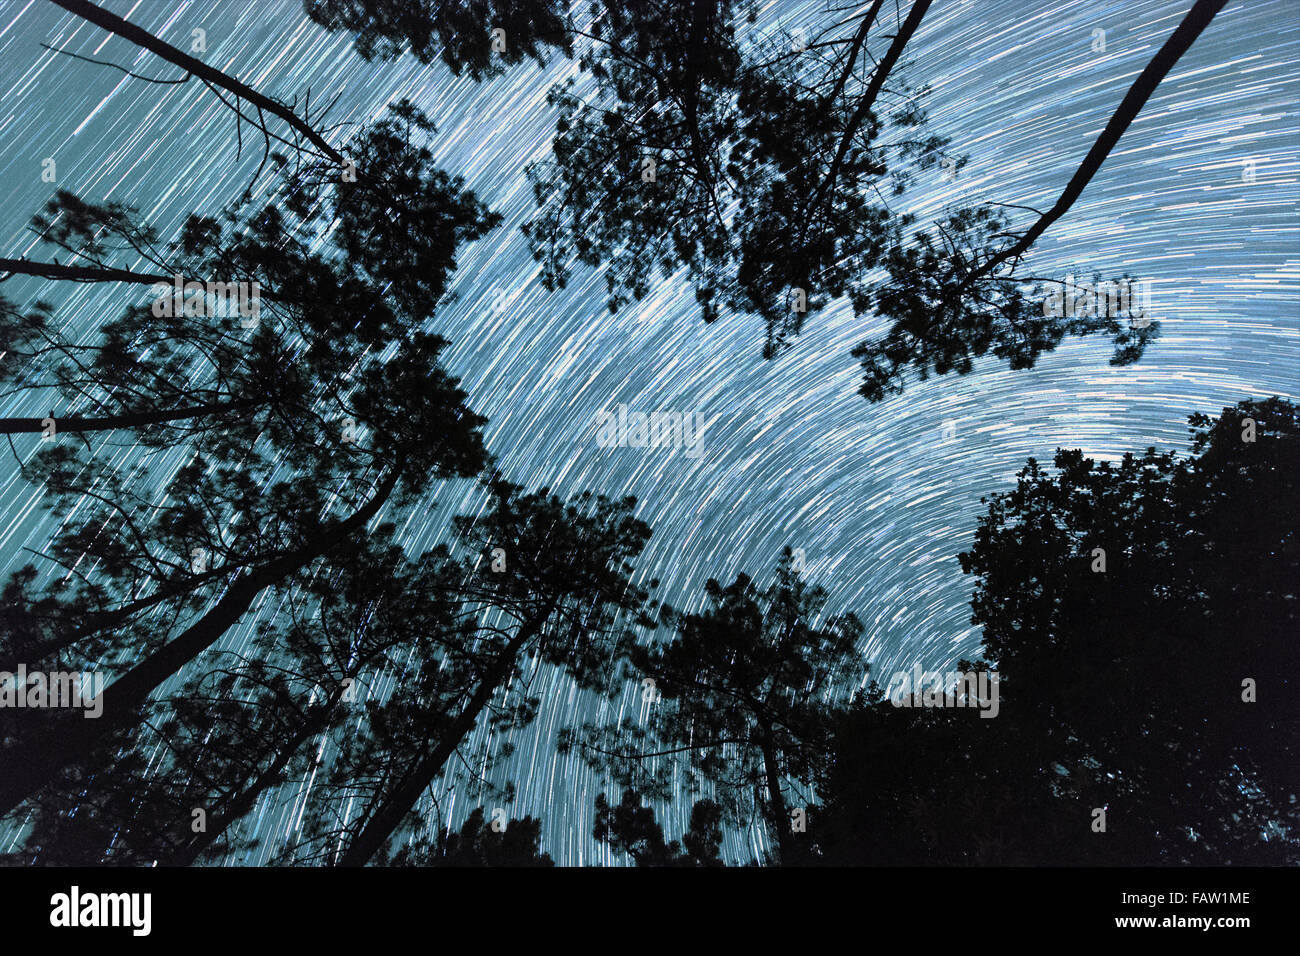 Star trails seen from amongst a grove of pine trees in the Dordogne region of France. Stock Photo